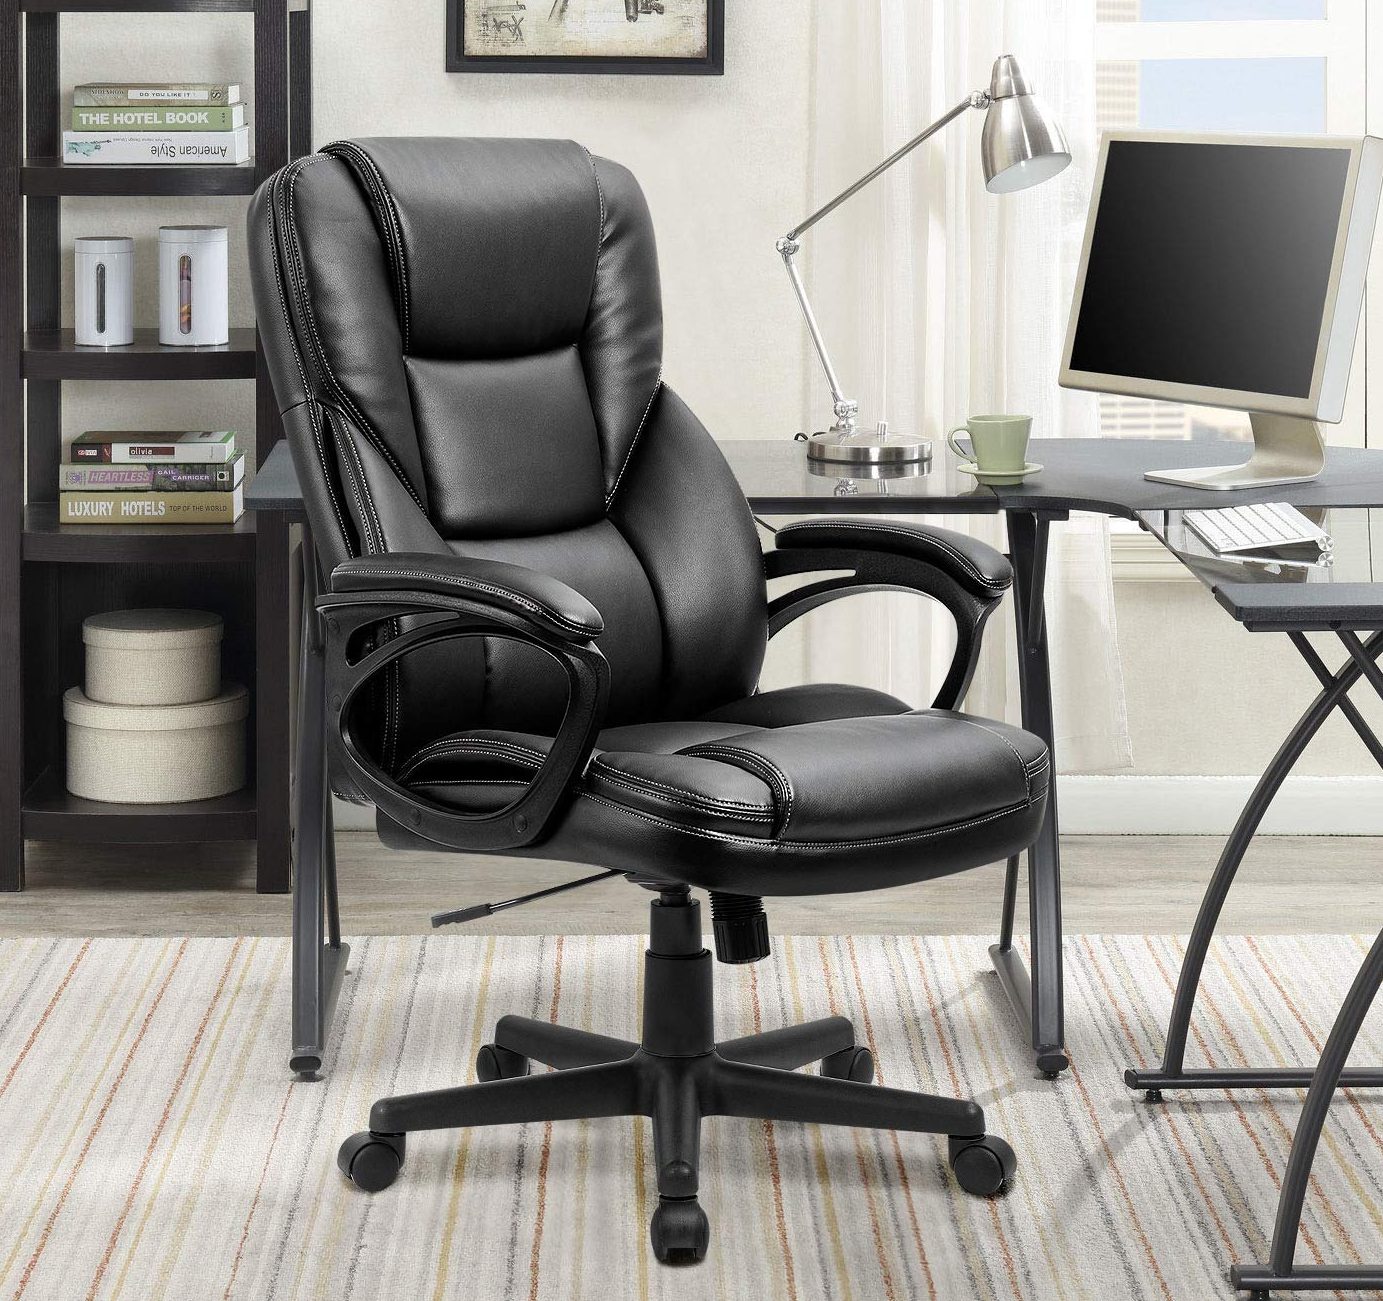 Top Picks for Best Leather Office Chair to Buy in 2022